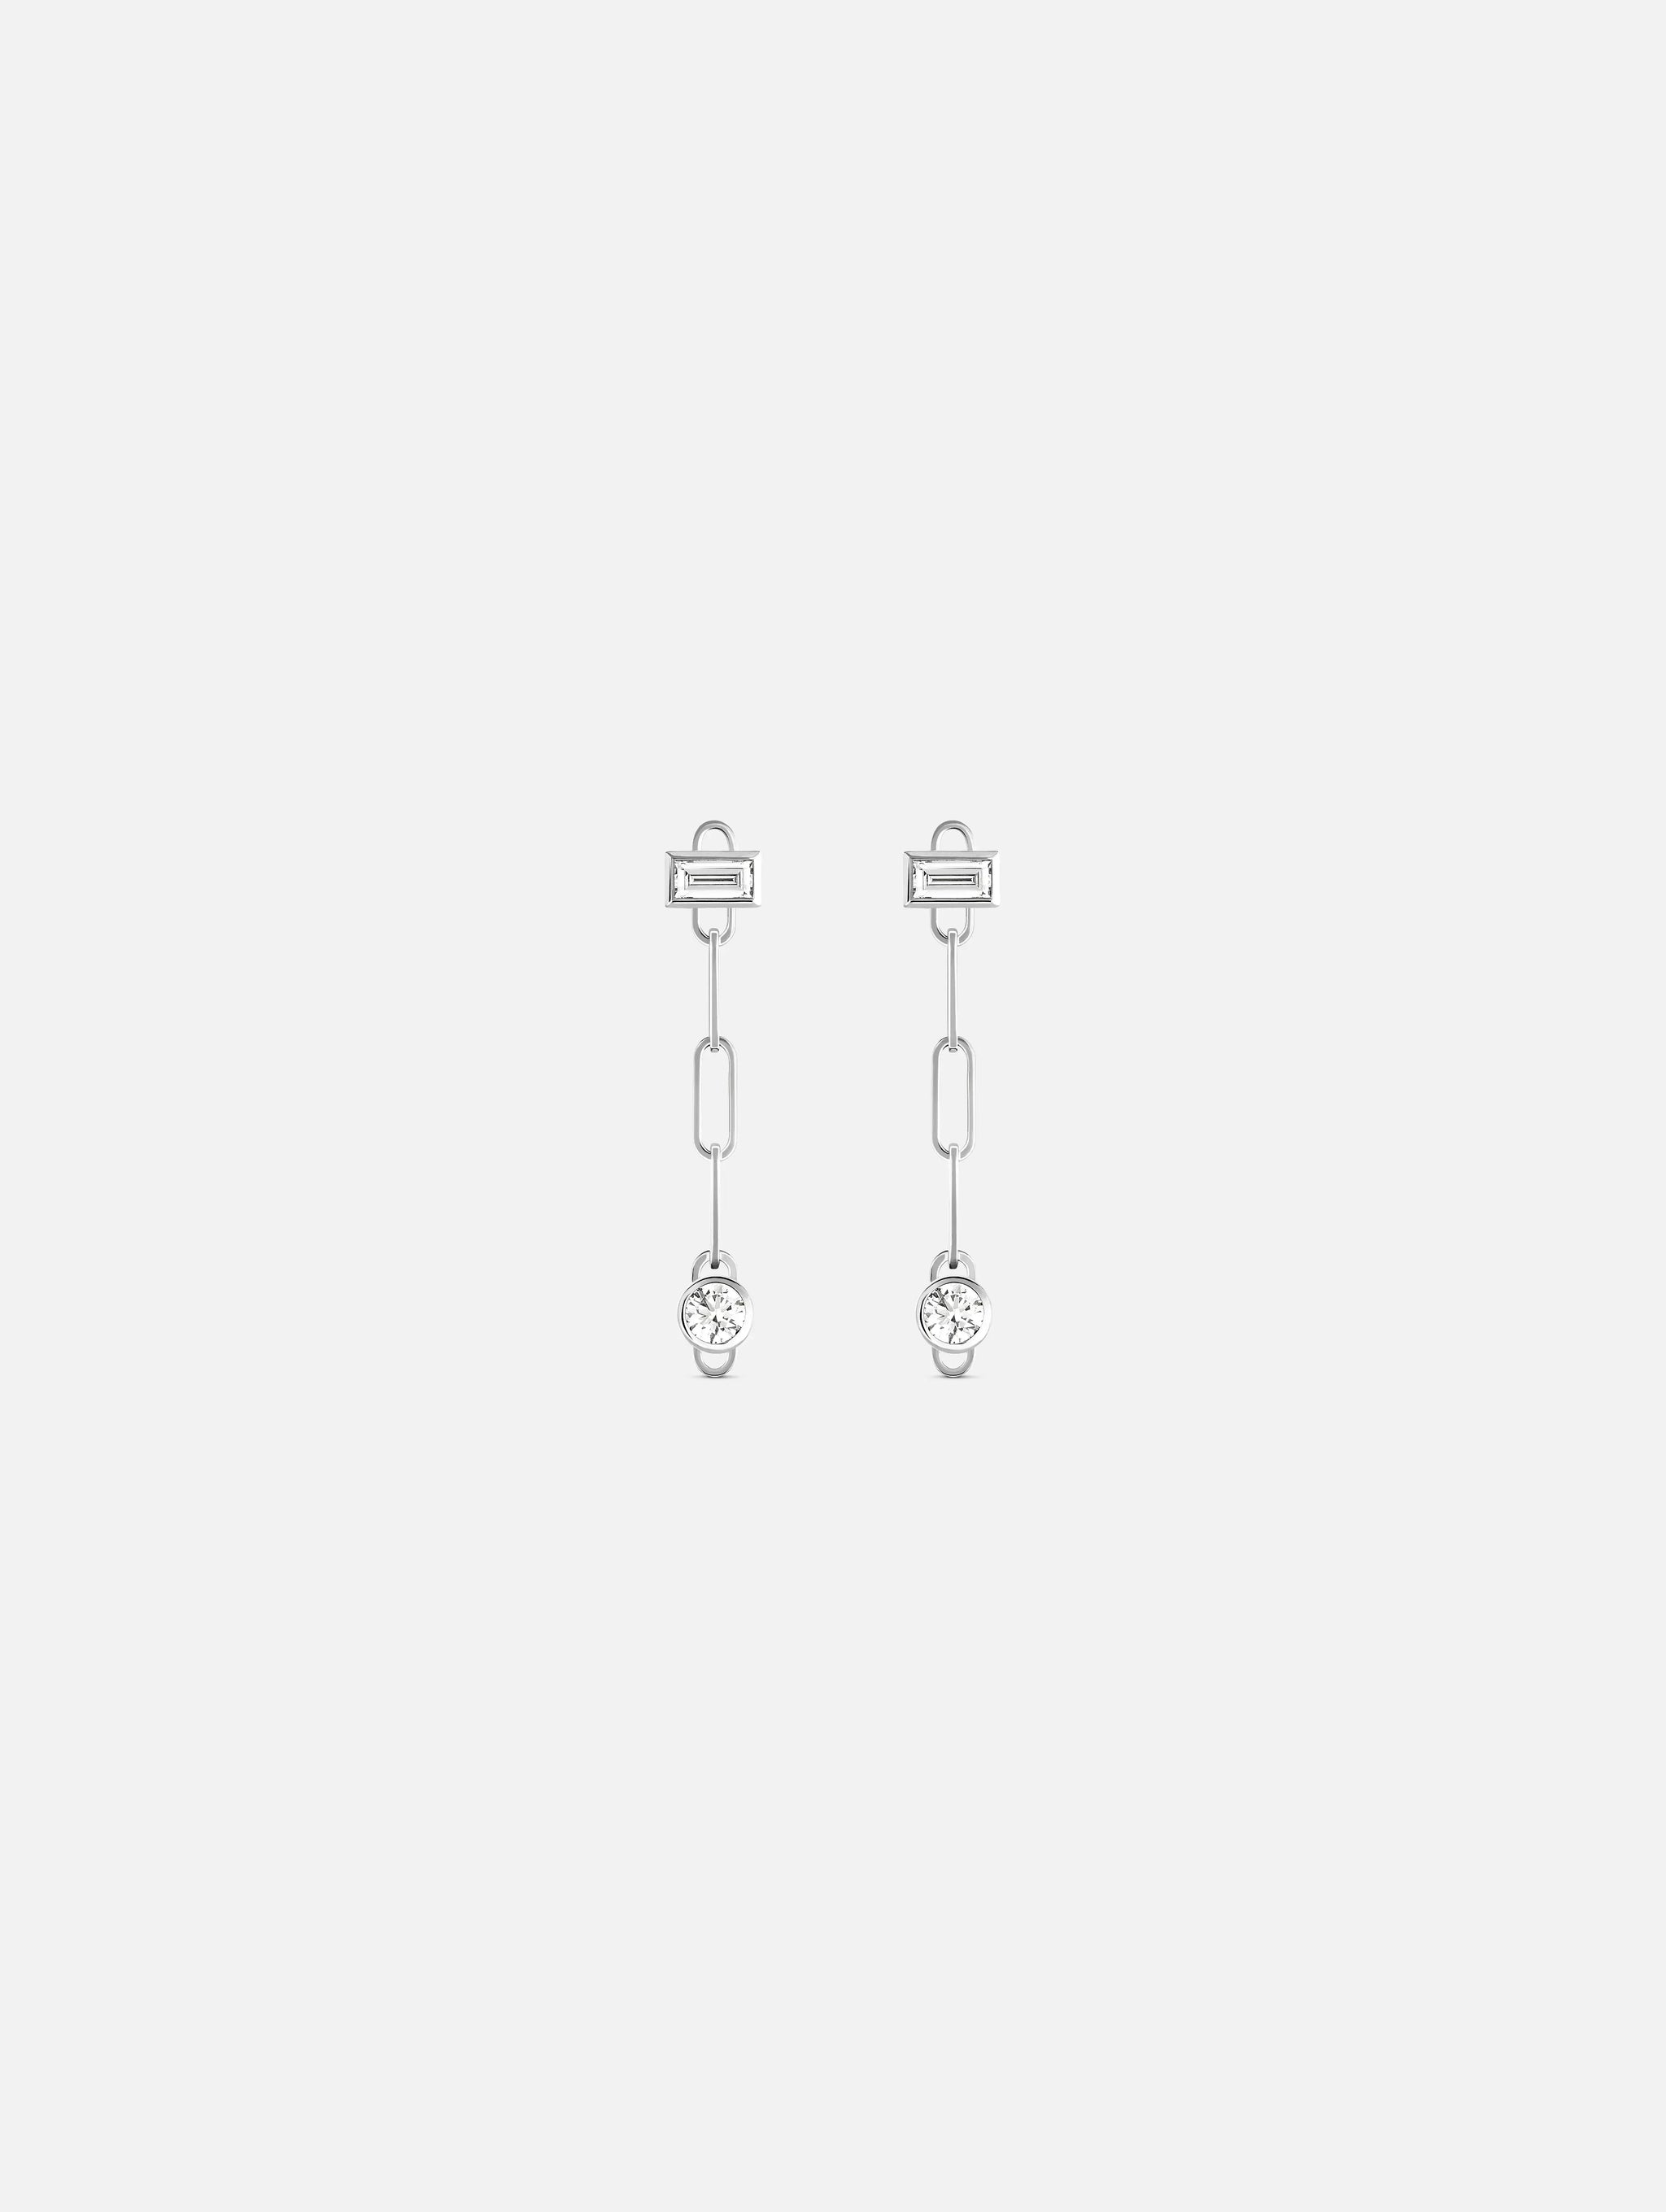 Baguette Round PM Classics Earrings in White Gold - 1 - Nouvel Heritage